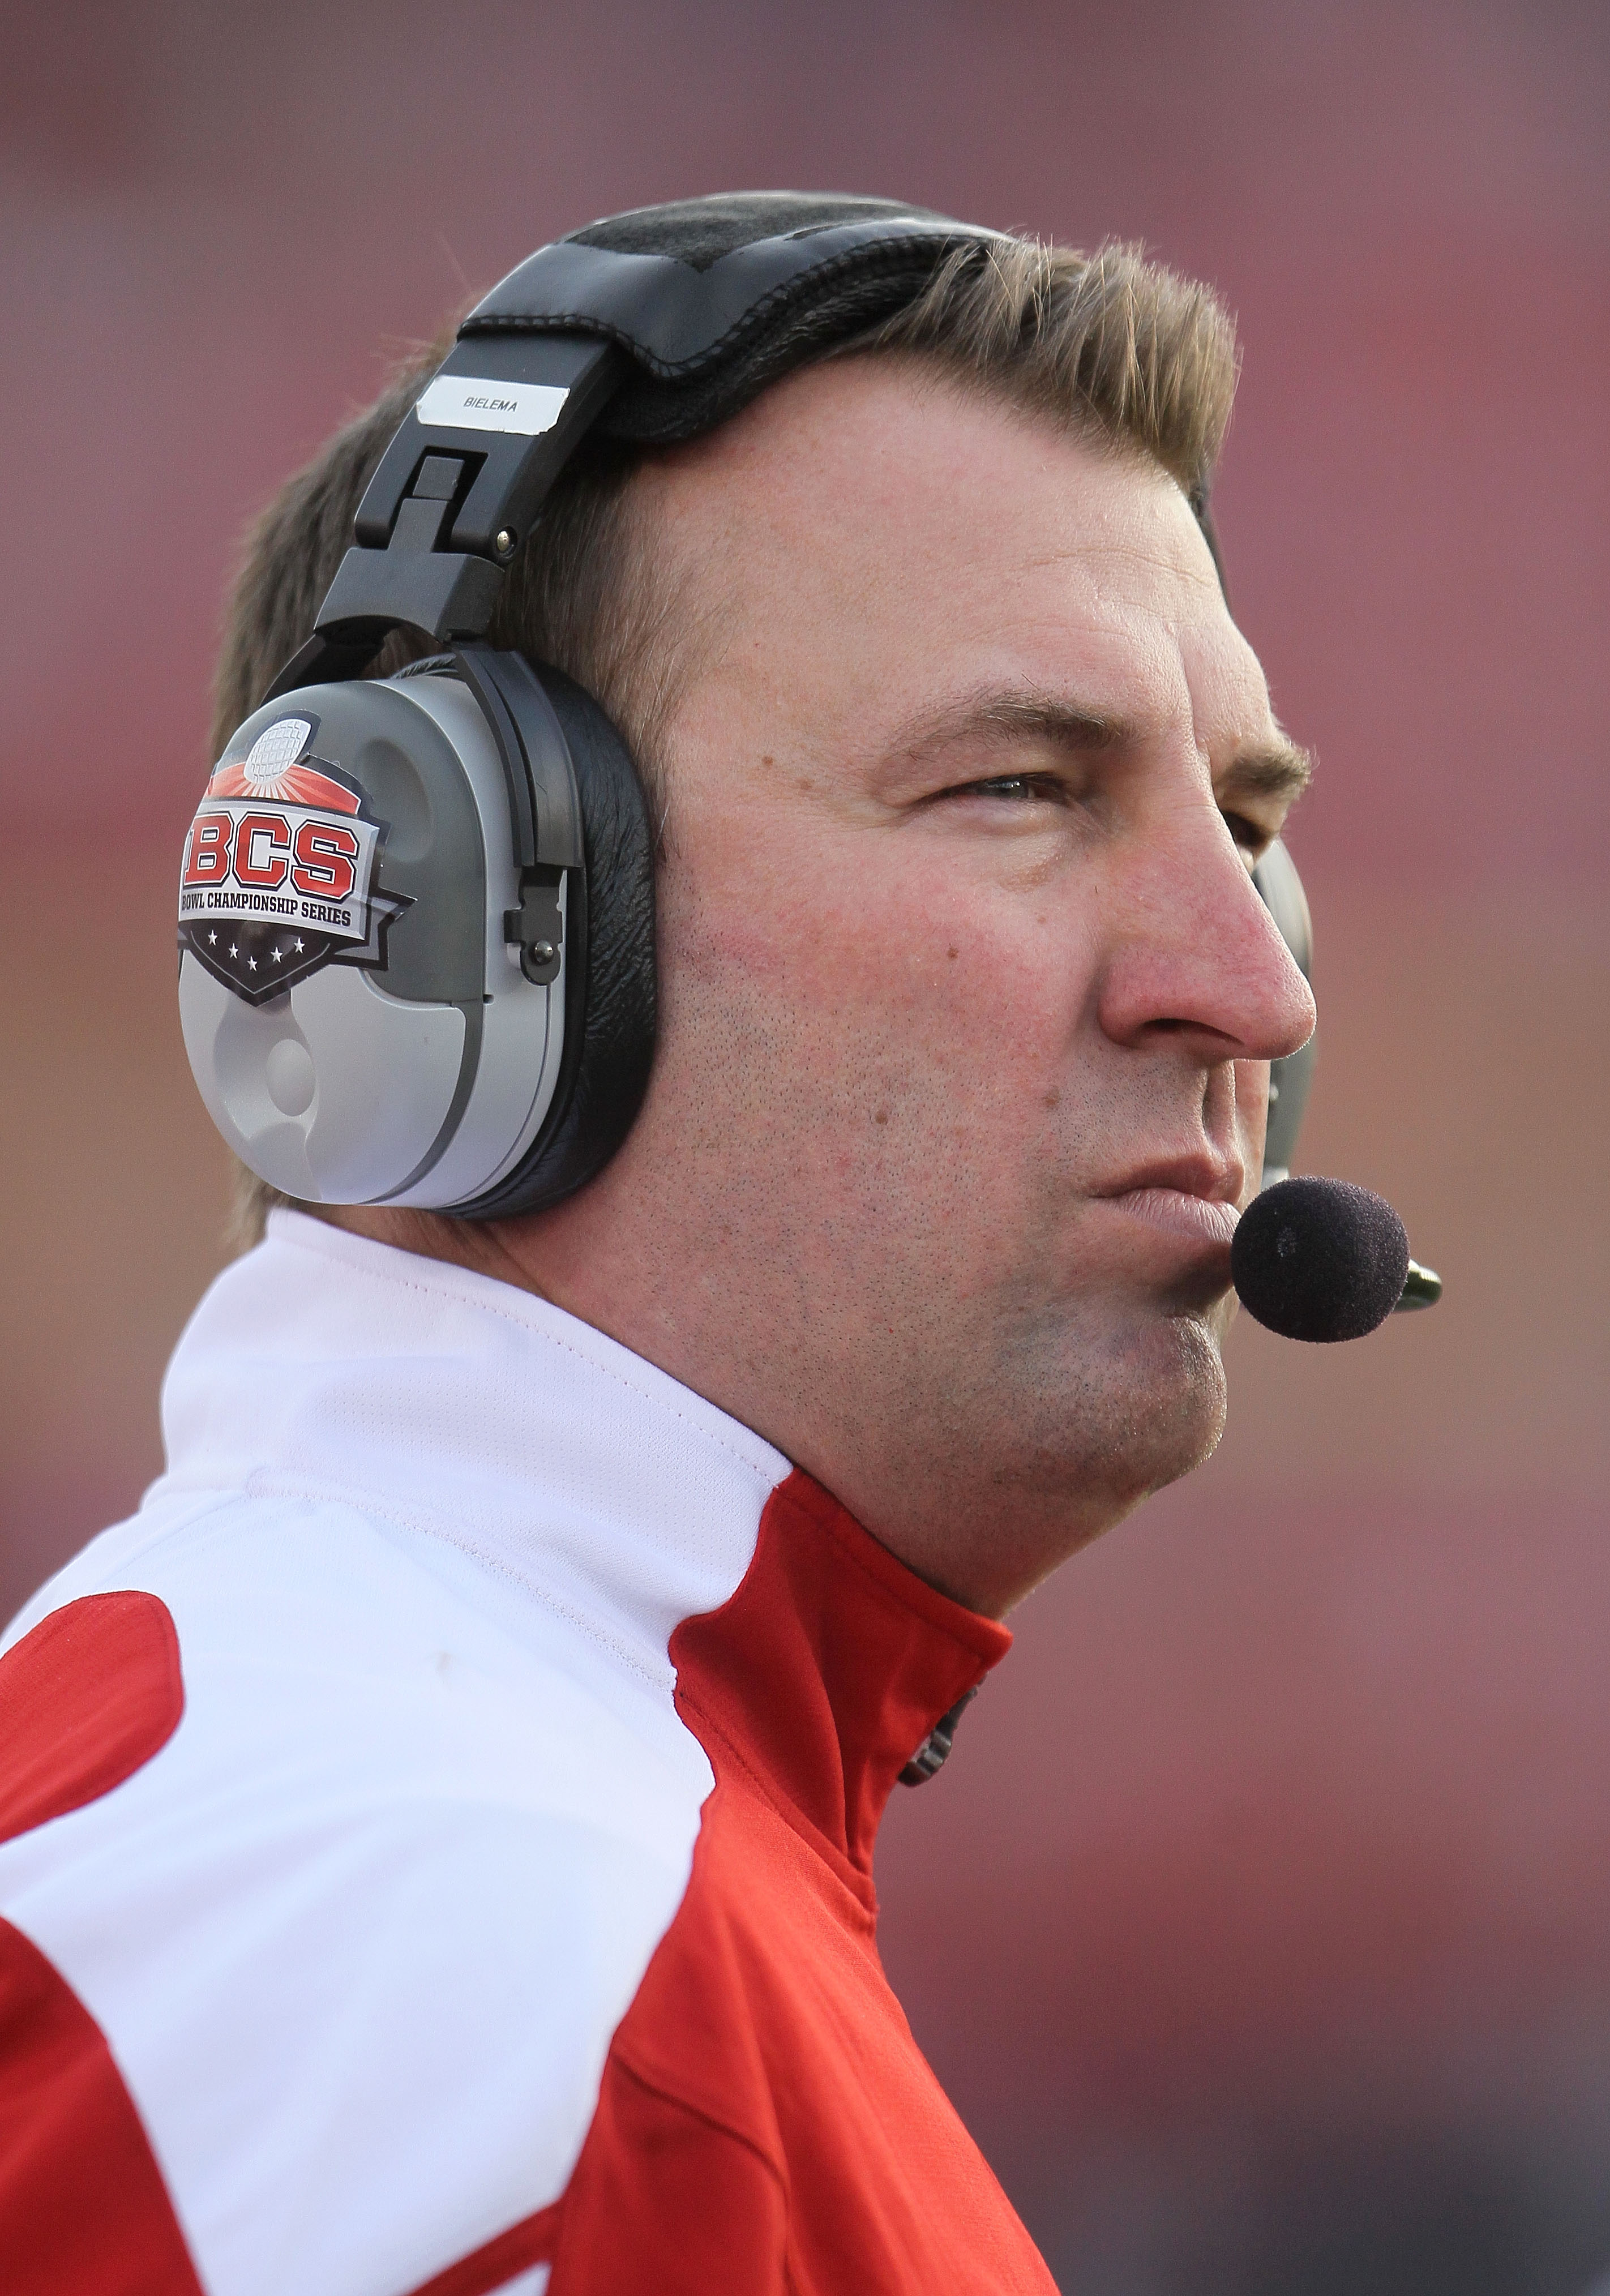 PASADENA, CA - JANUARY 01:  Head coach Bret Bielema of the Wisconsin Badgers stands on the field during the game against the TCU Horned Frogs in the 97th Rose Bowl game on January 1, 2011 in Pasadena, California.  (Photo by Jeff Gross/Getty Images)